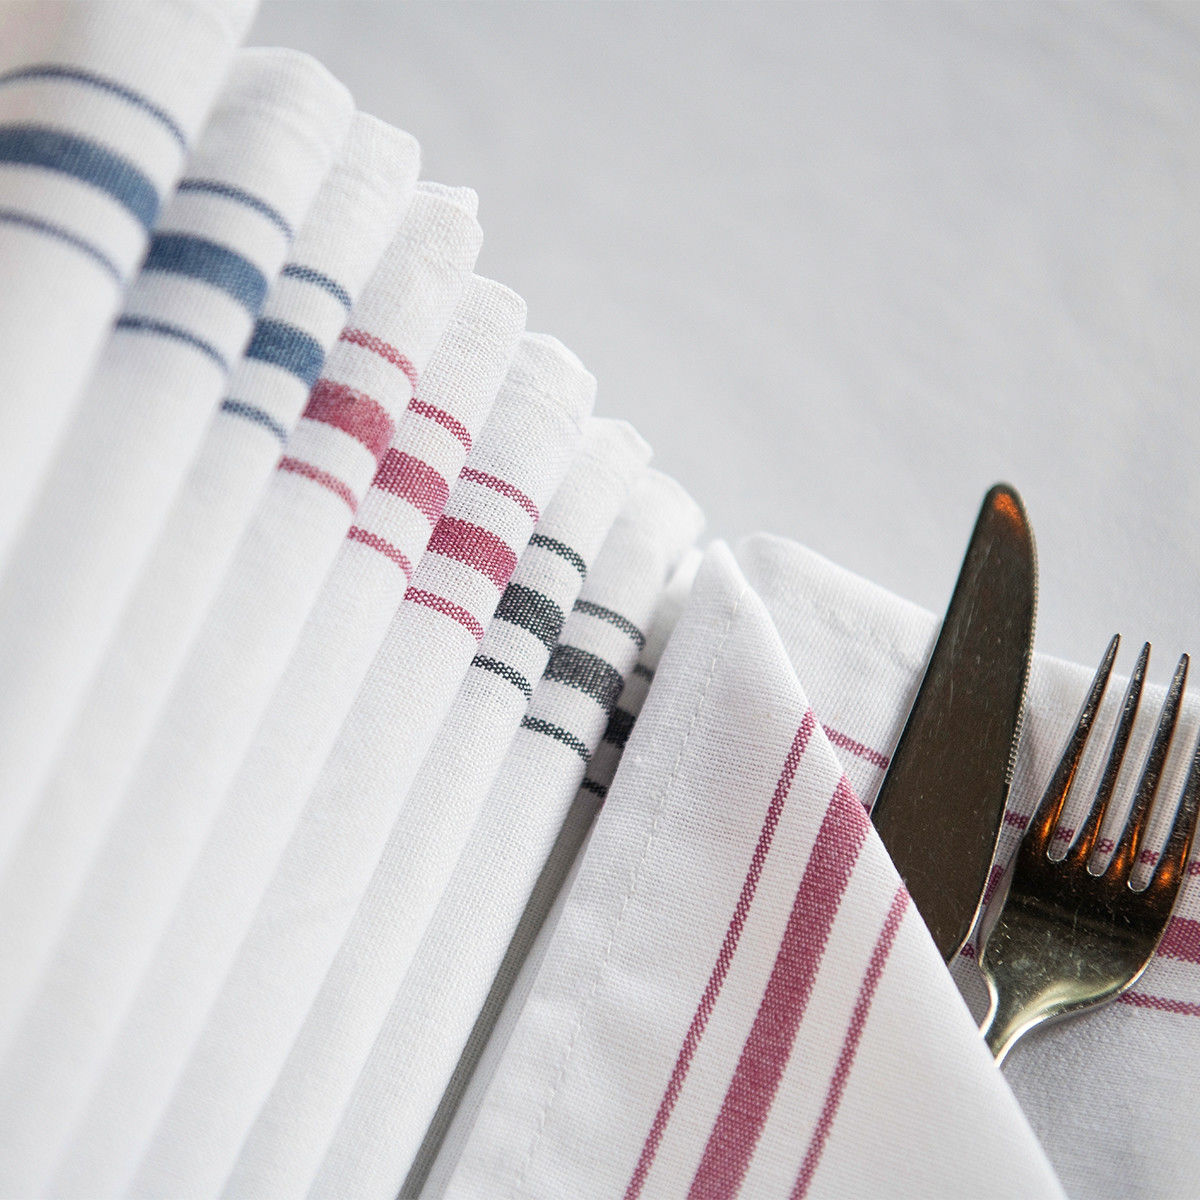 What material are these Cotton Bistro Striped Napkins made of, and what are their notable qualities?